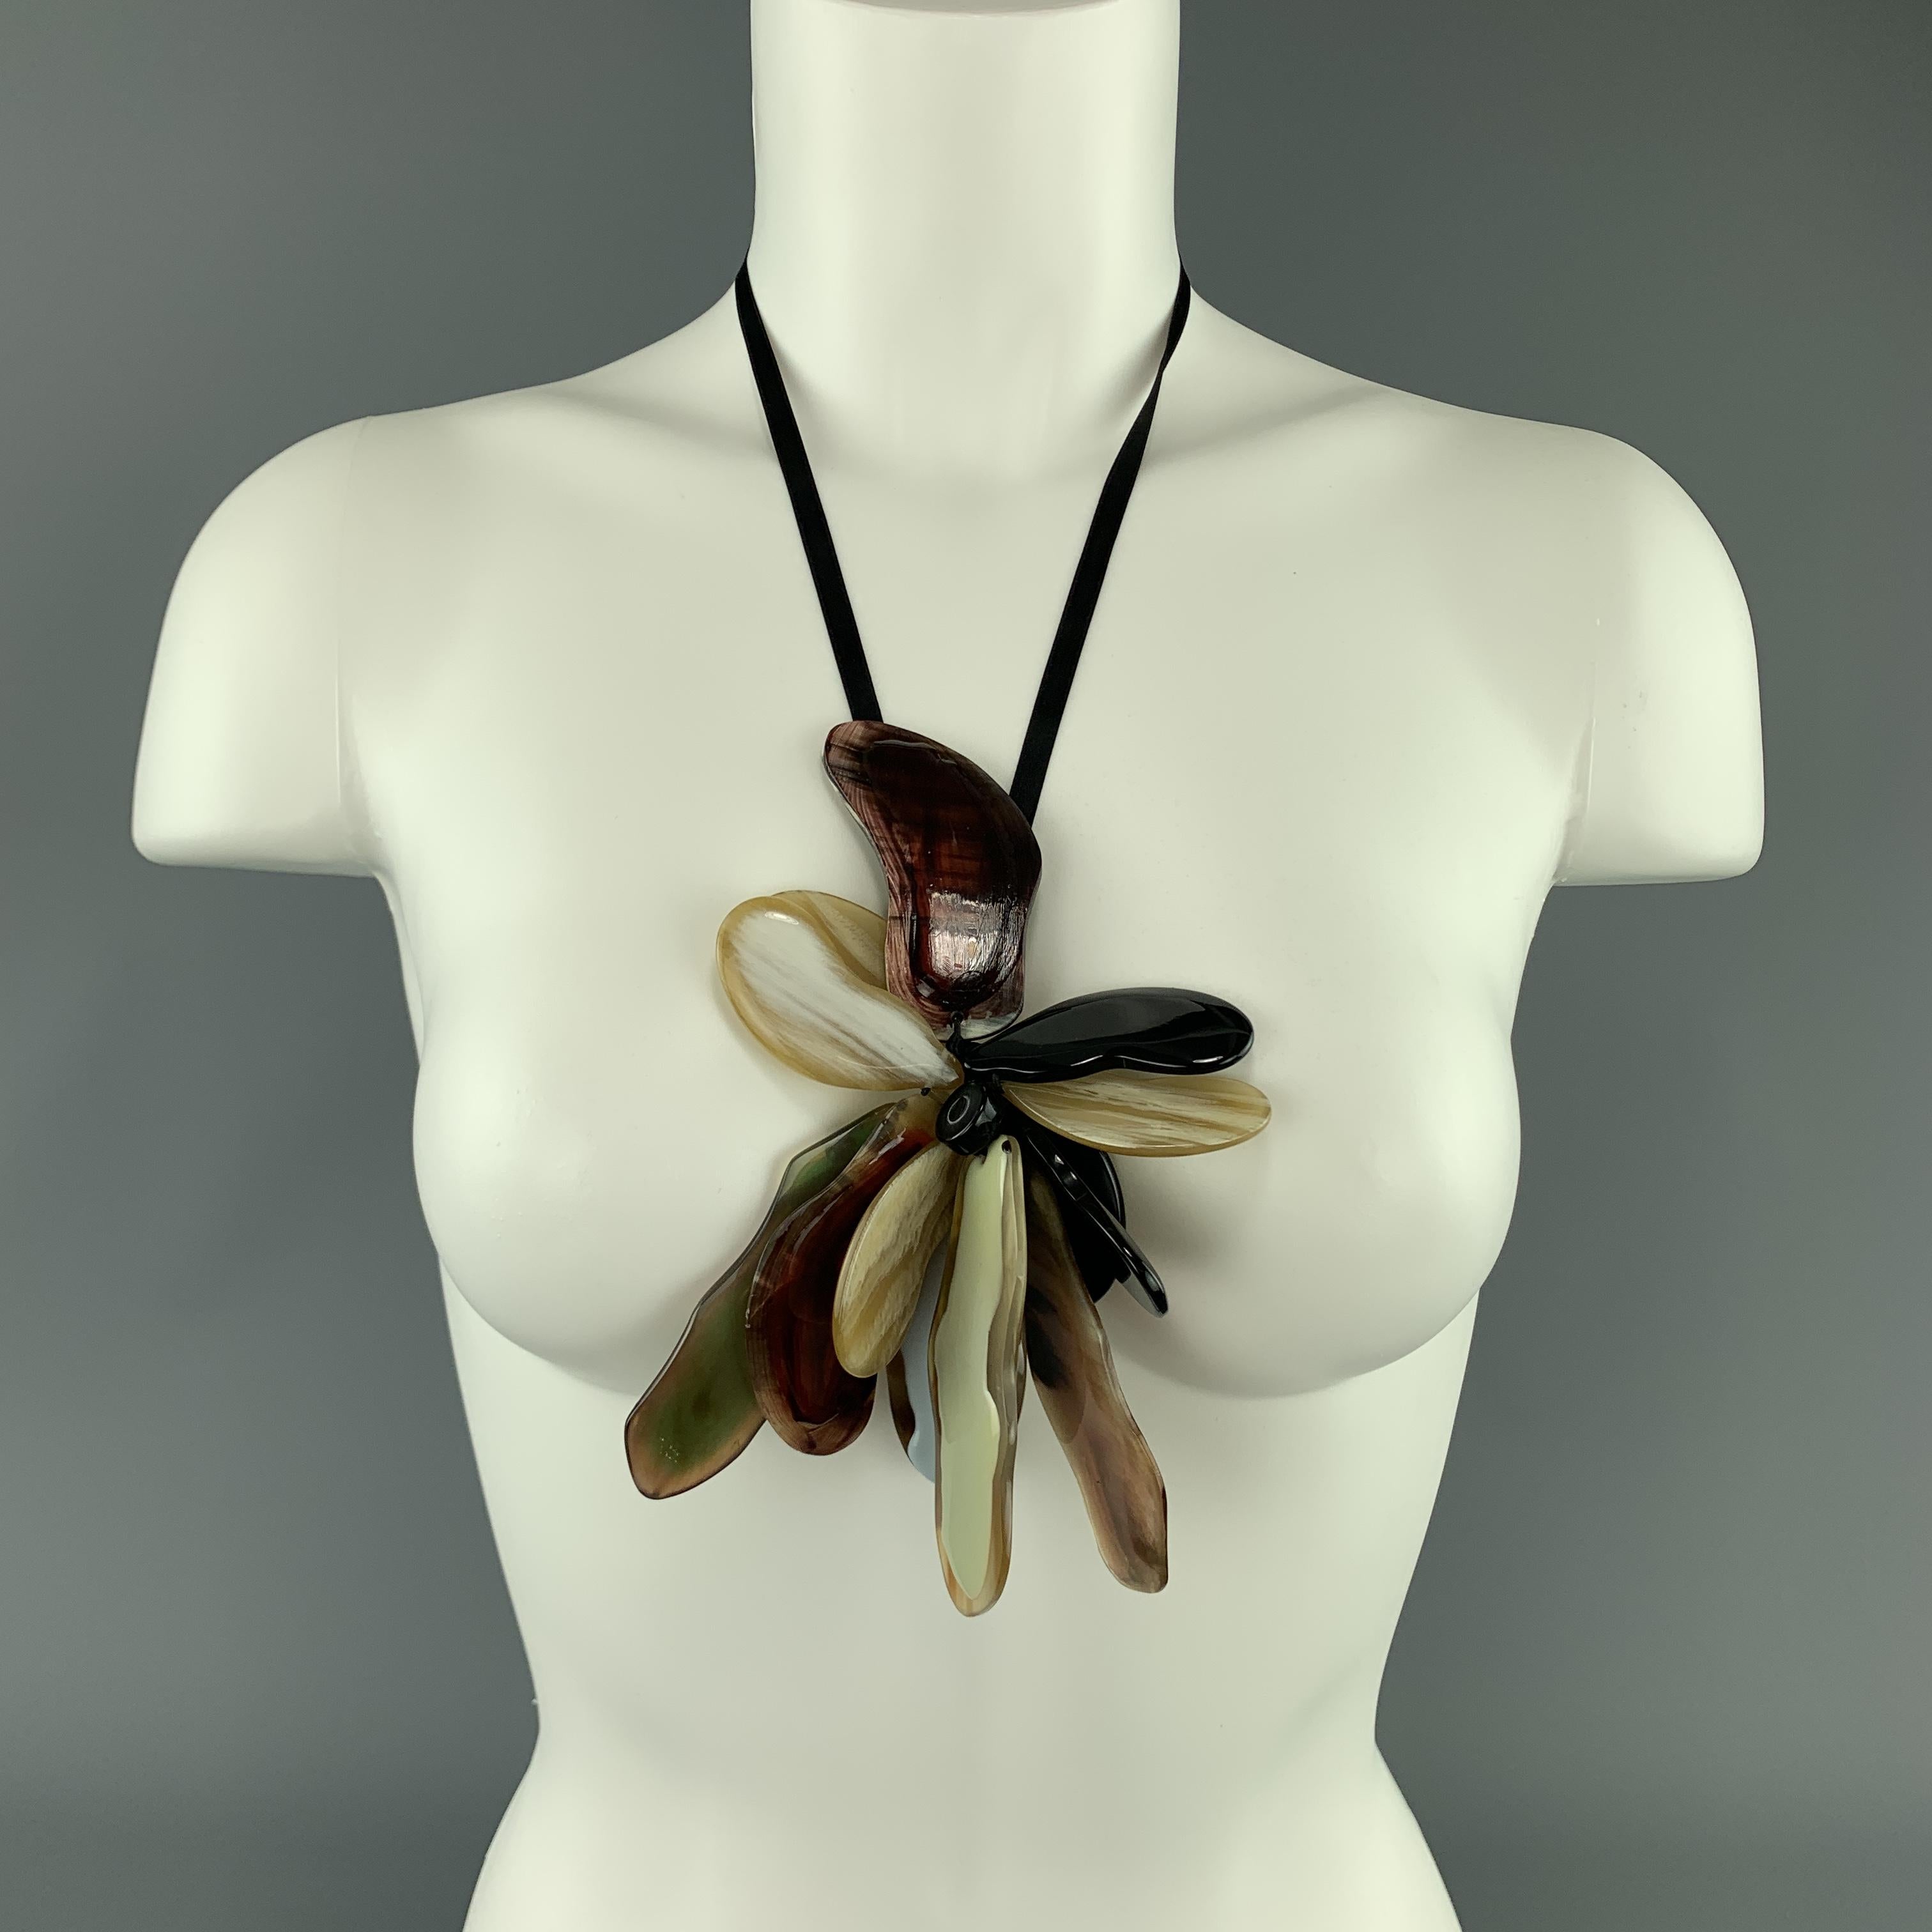 MARNI statement necklace features an abstract flower made of horn and resin petals on a tied ribbon. With Box.

Excellent Pre-Owned Condition.

Petals: 3.5 in.
Drop: 35 in.